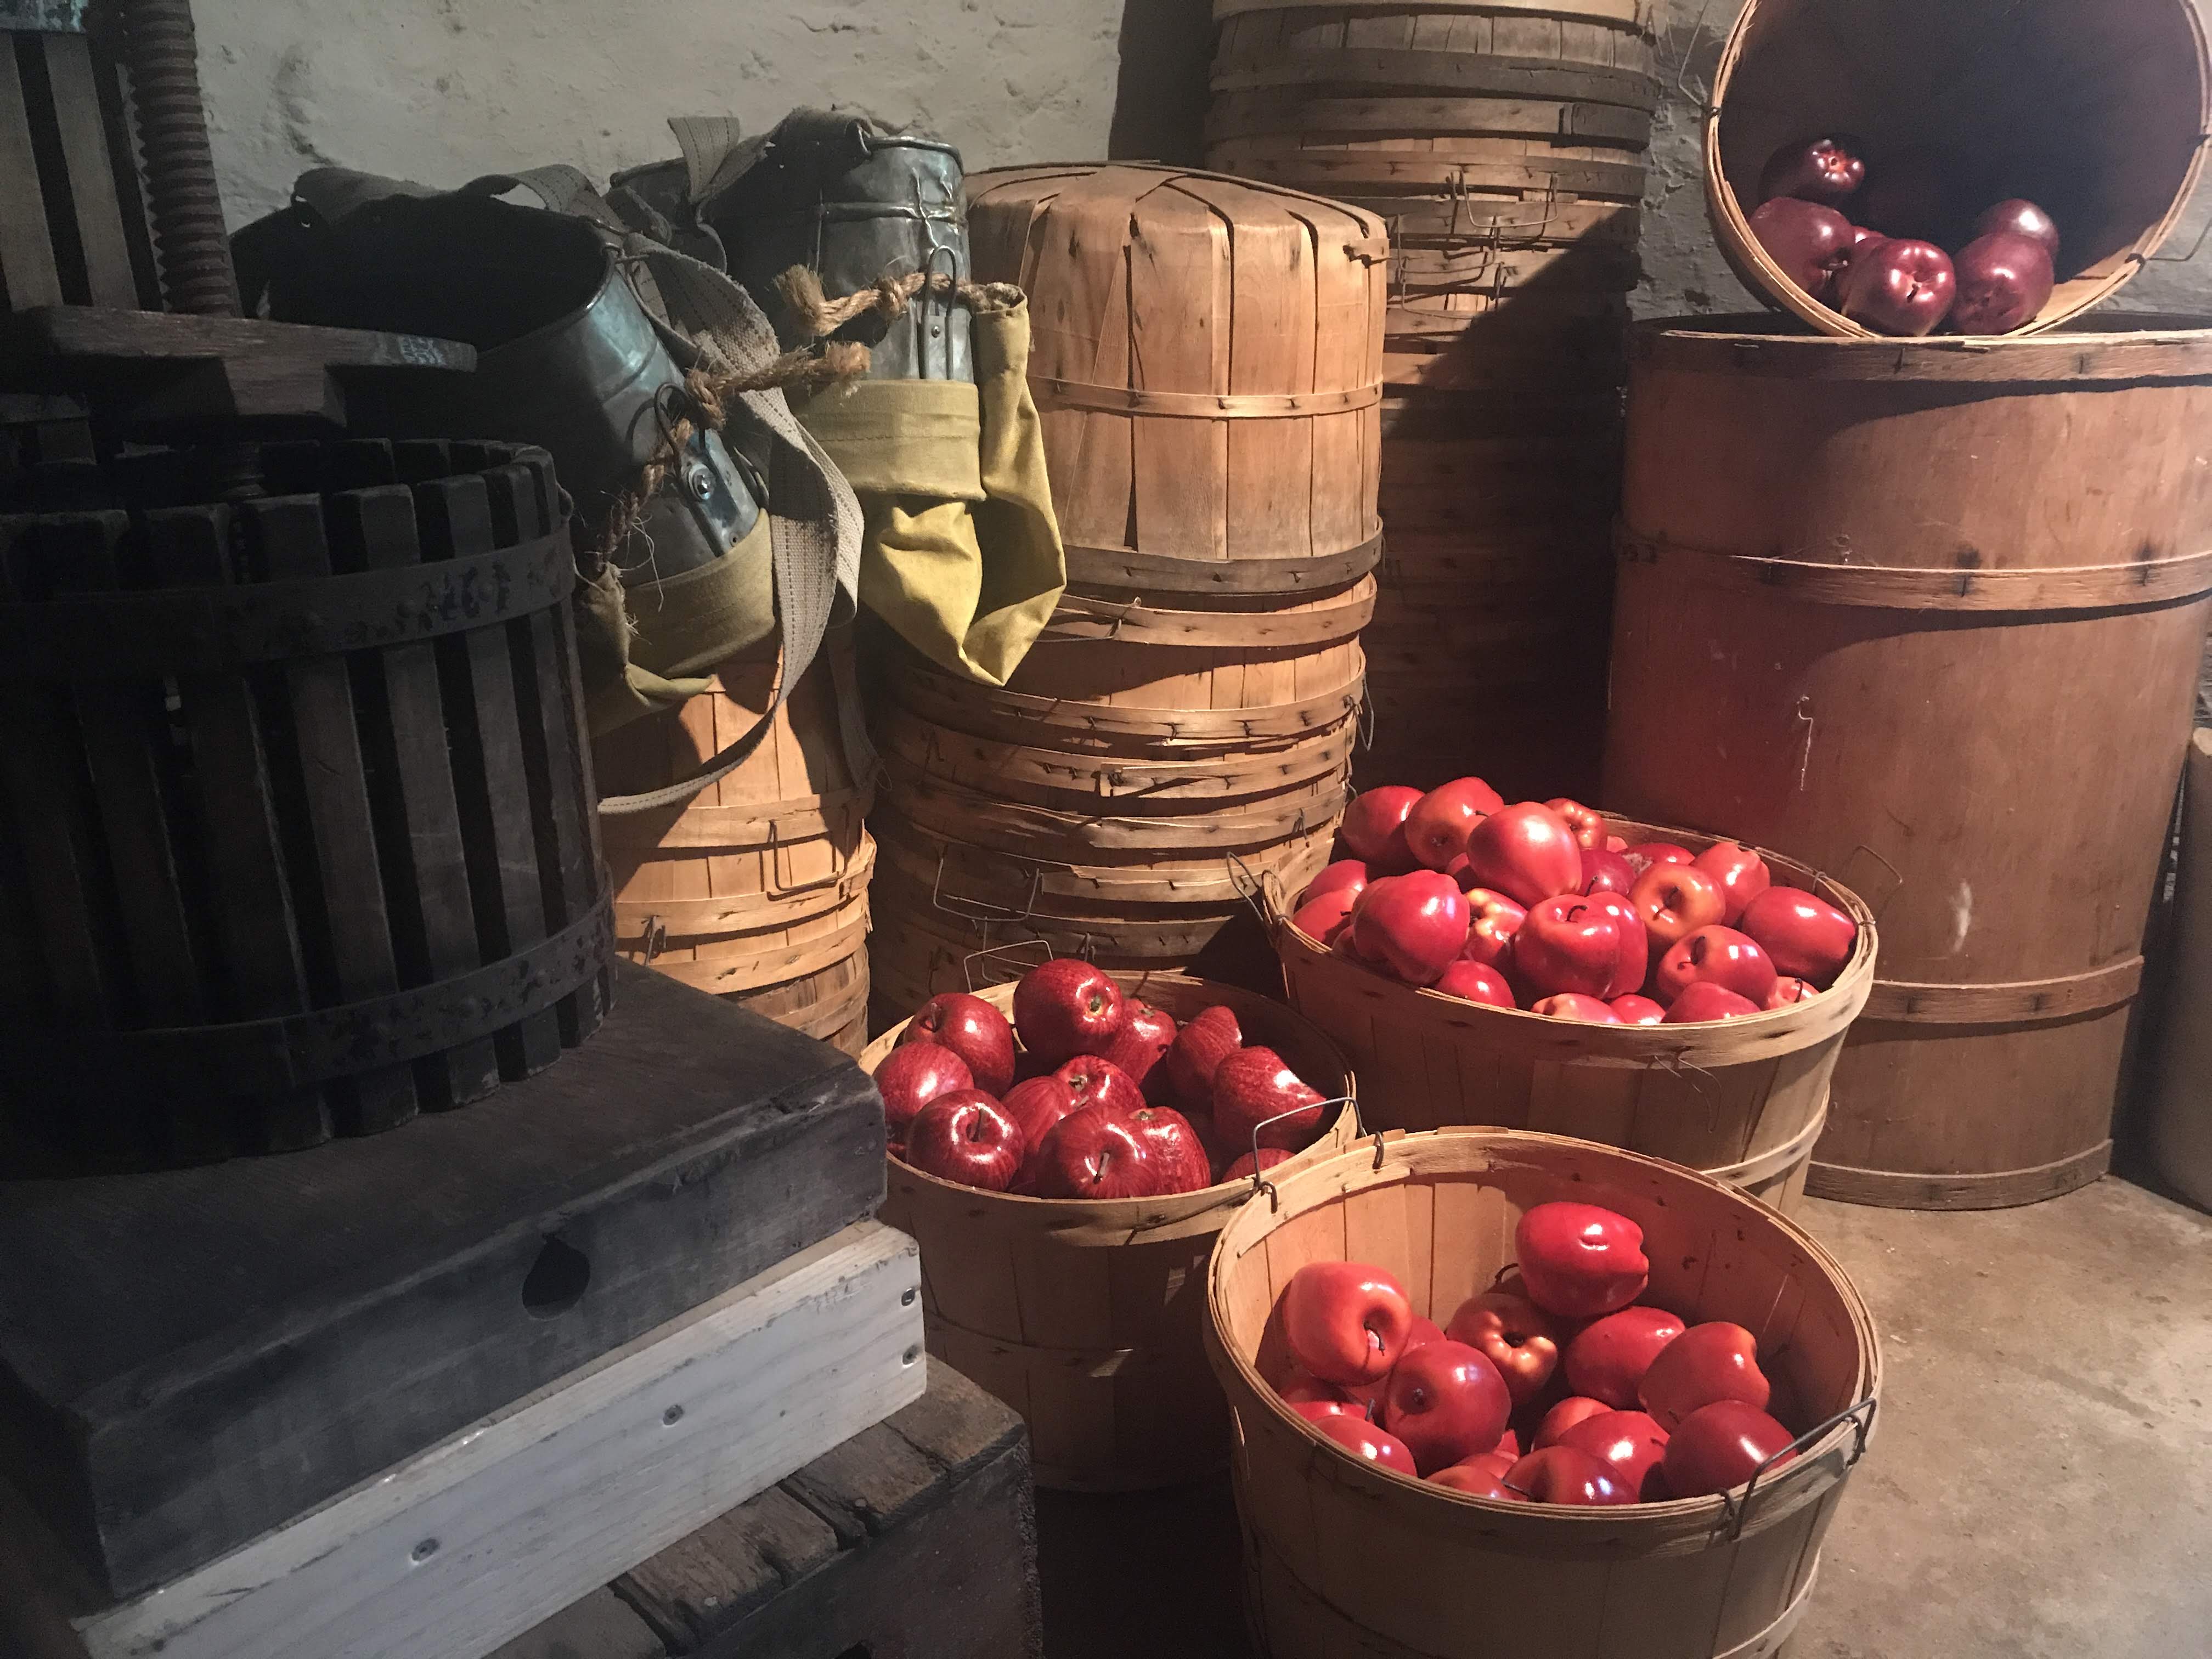 Three baskets of apples in the foreground of stacked baskets